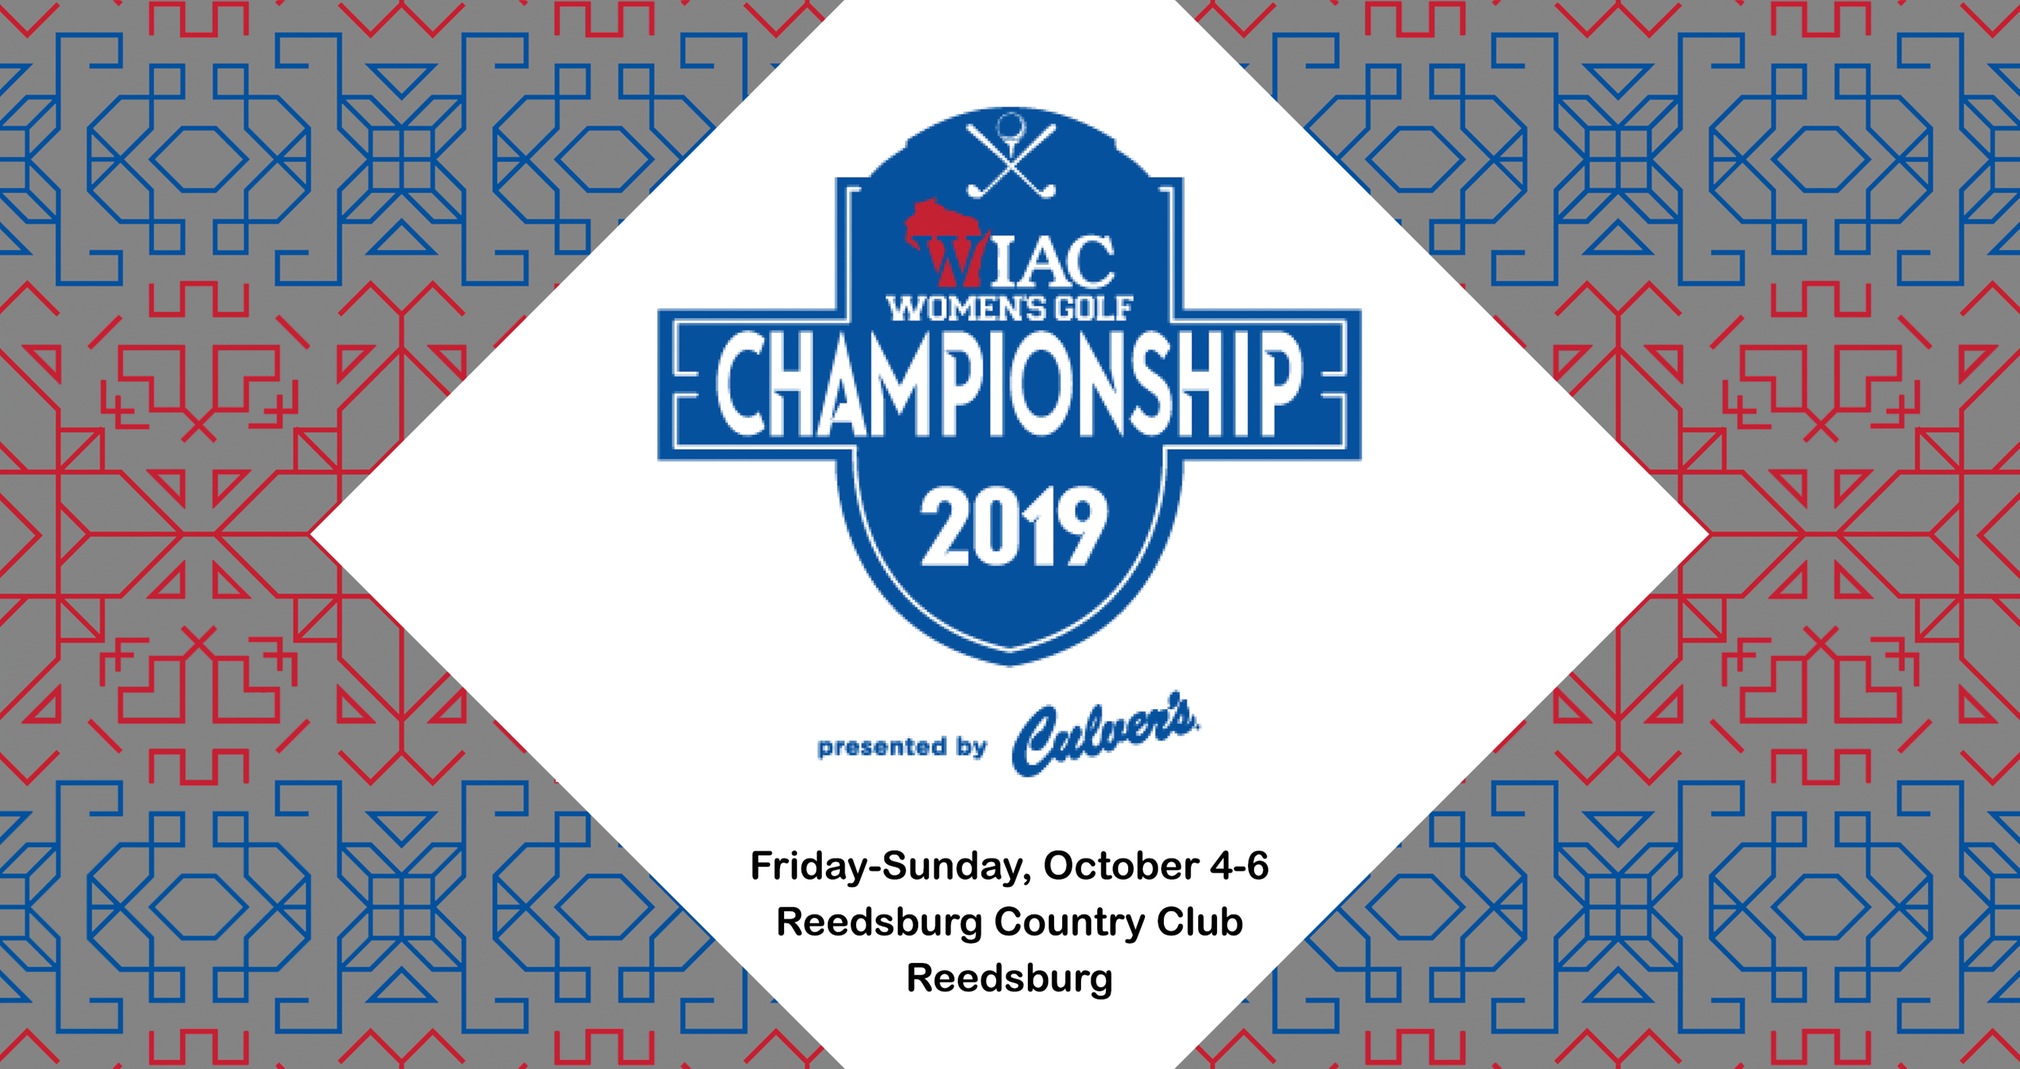 Titans Expected To Contend For WIAC Golf Title